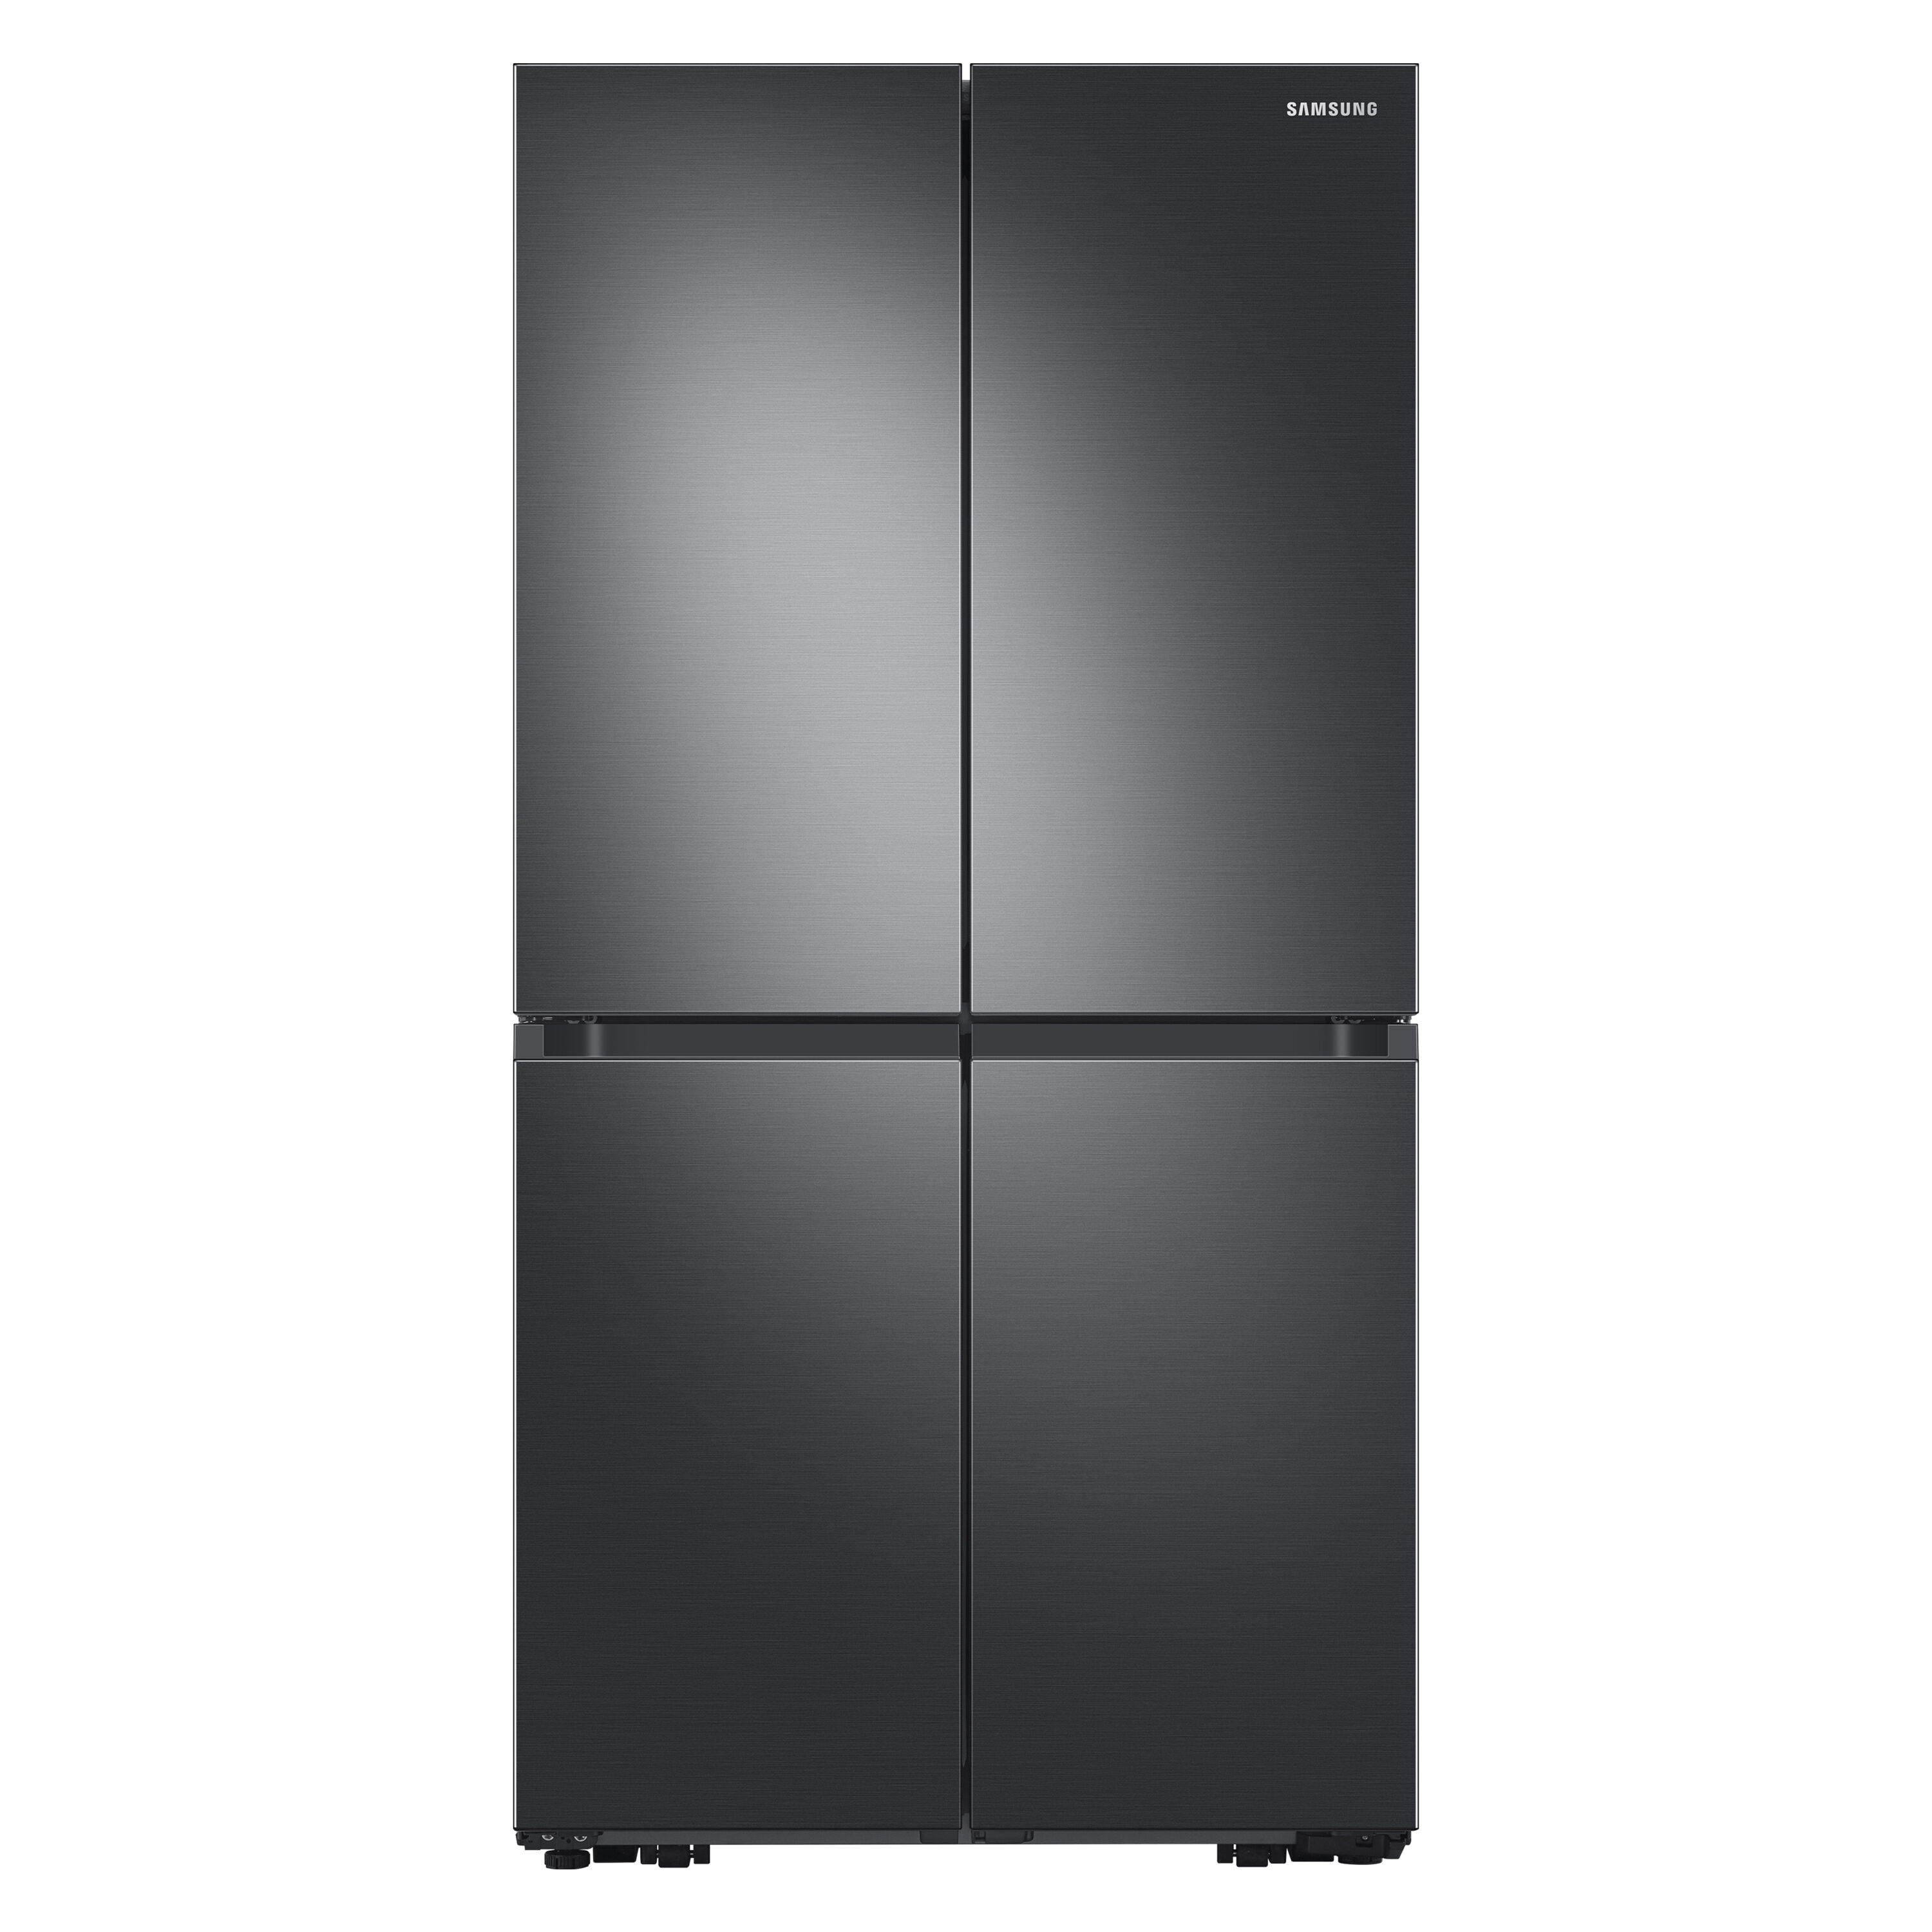 18 Cu. ft. Capacity Top Freezer Refrigerator with FlexZone and Automatic Ice Maker